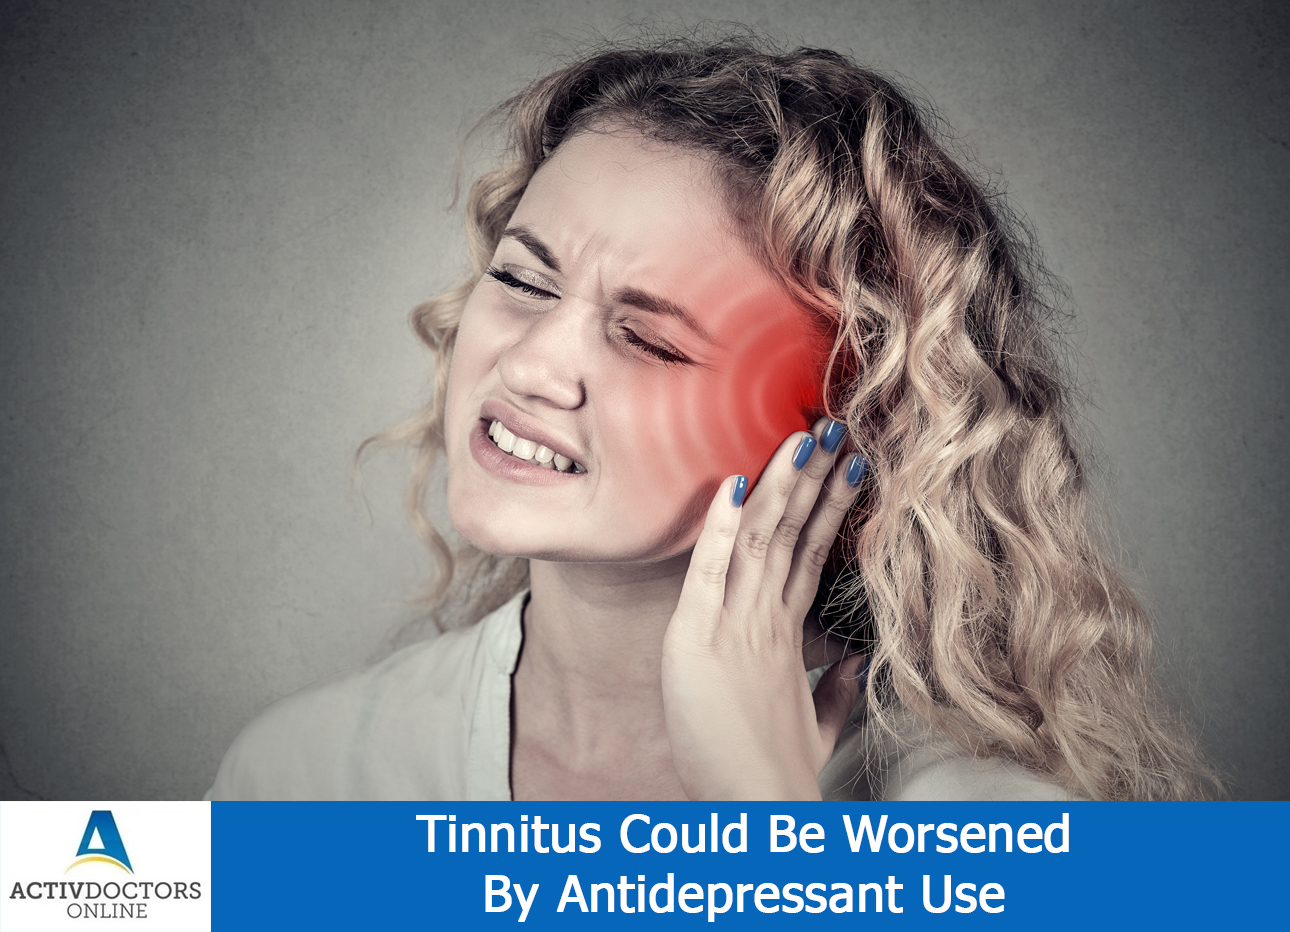 Tinnitus Could Be Worsened By Antidepressant Use